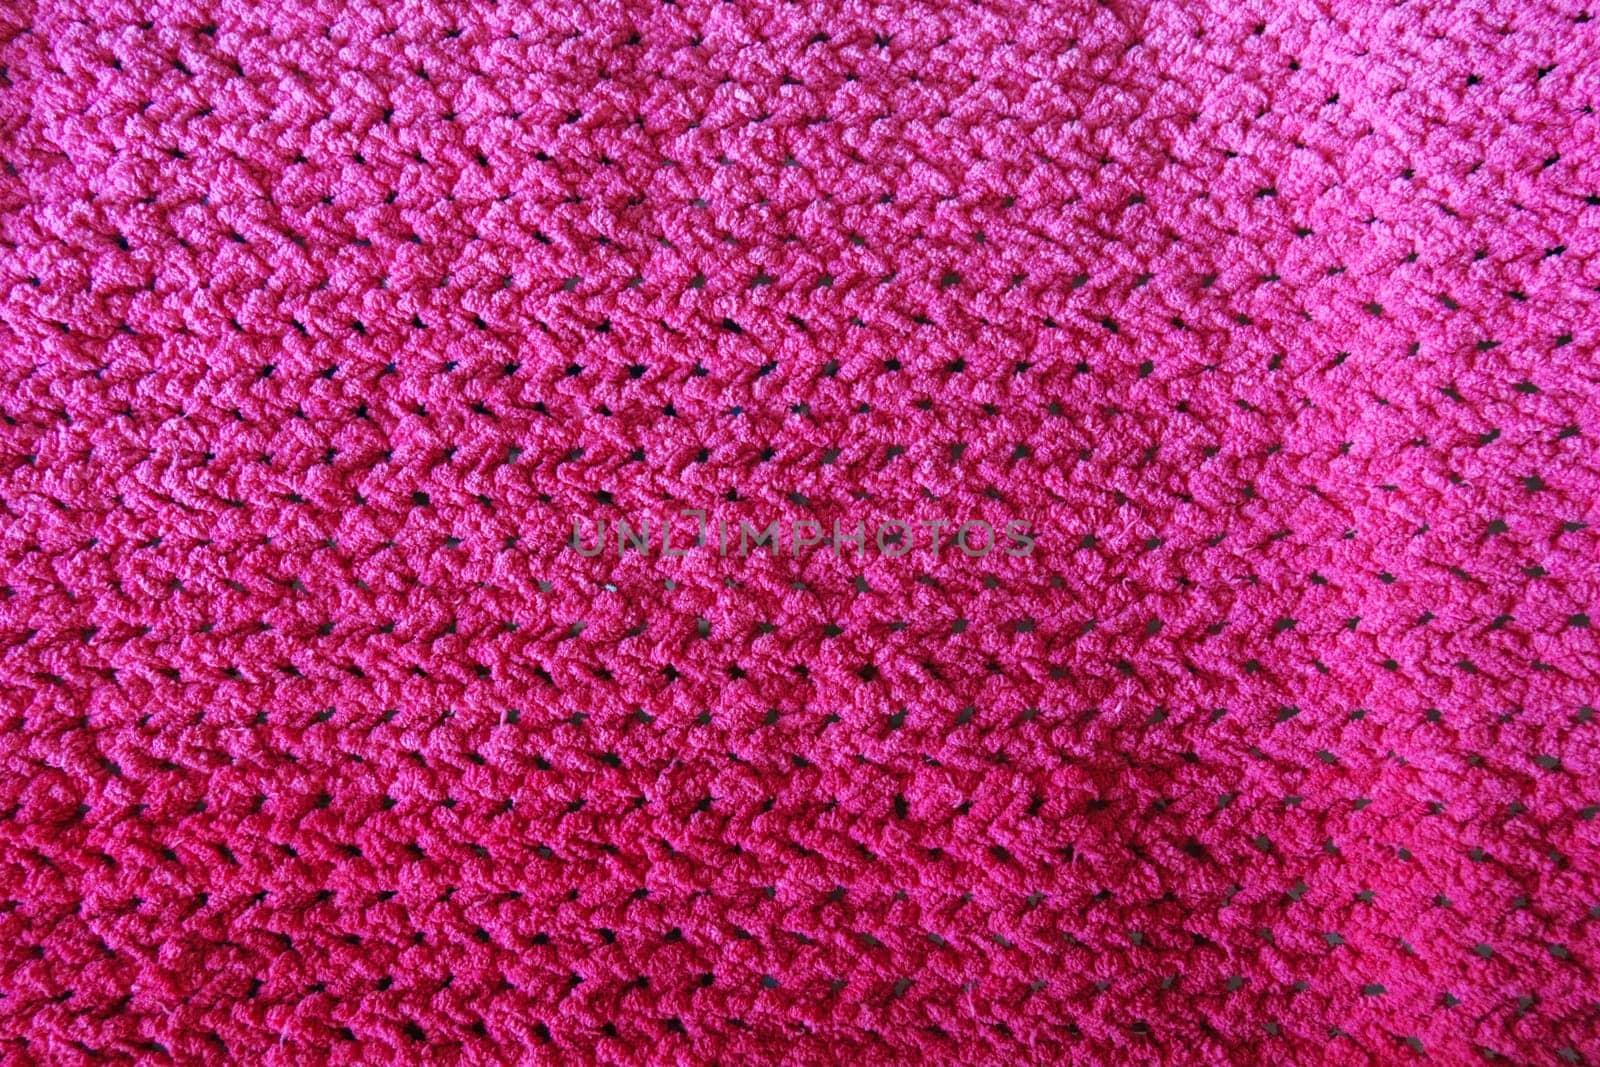 Textures of this close-up of a pink crocheted blanket. by darksoul72